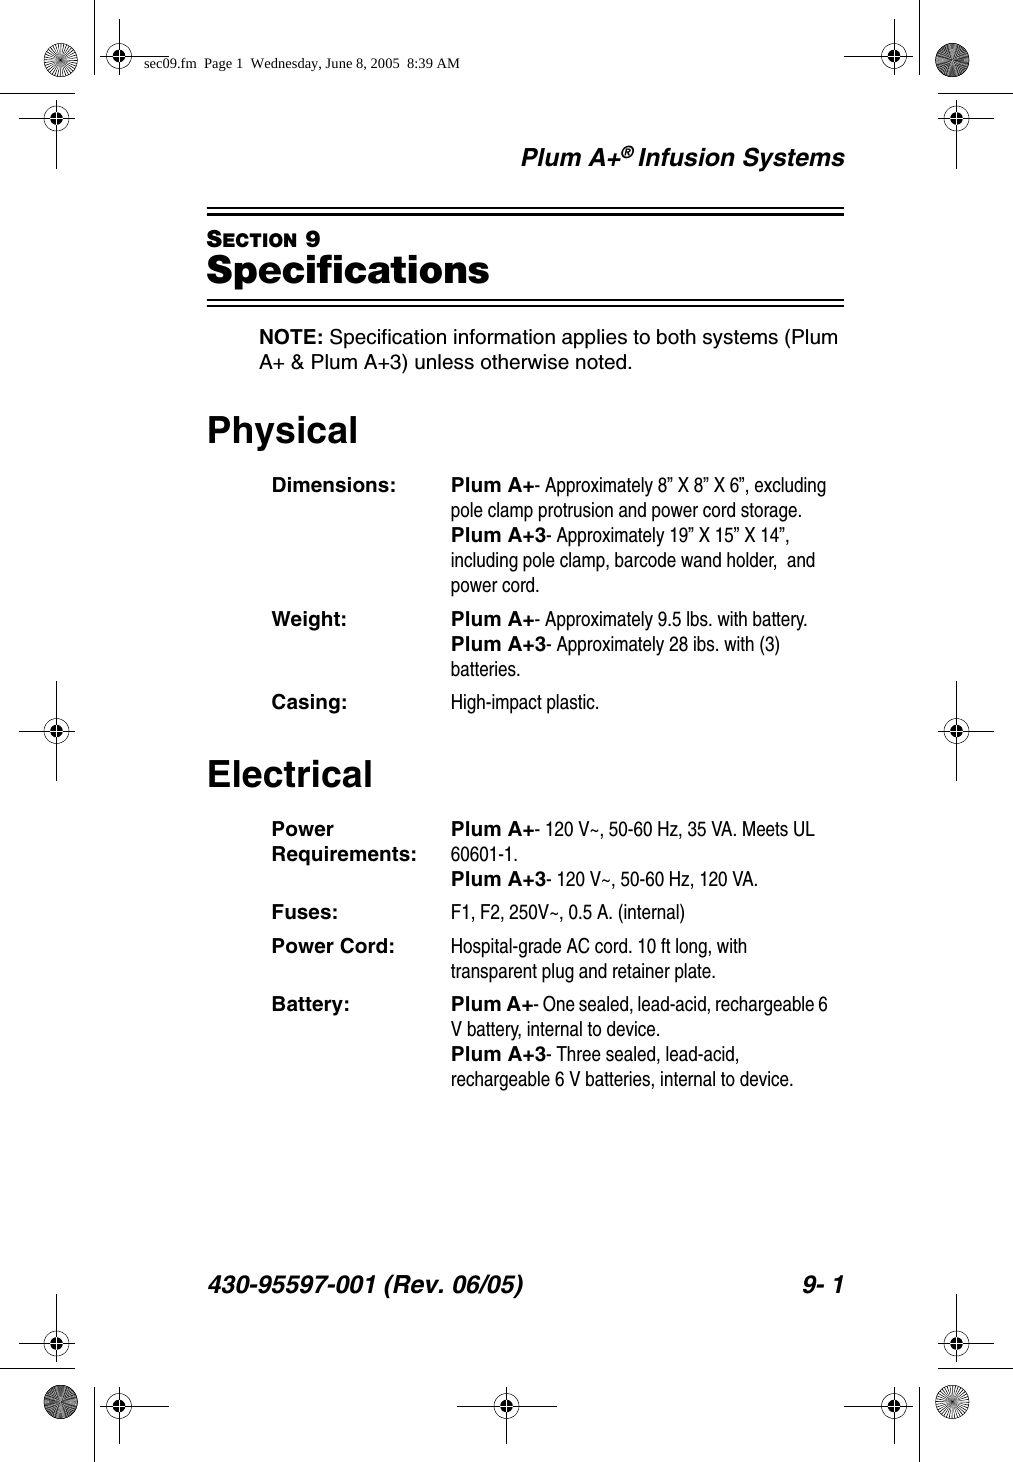 Plum A+® Infusion Systems430-95597-001 (Rev. 06/05) 9- 1SECTION 9SpecificationsNOTE: Specification information applies to both systems (Plum A+ &amp; Plum A+3) unless otherwise noted.PhysicalElectricalDimensions: Plum A+- Approximately 8” X 8” X 6”, excluding pole clamp protrusion and power cord storage.Plum A+3- Approximately 19” X 15” X 14”, including pole clamp, barcode wand holder,  and power cord.Weight: Plum A+- Approximately 9.5 lbs. with battery.Plum A+3- Approximately 28 ibs. with (3) batteries.Casing: High-impact plastic.Power Requirements:Plum A+- 120 V~, 50-60 Hz, 35 VA. Meets UL 60601-1.Plum A+3- 120 V~, 50-60 Hz, 120 VA.Fuses: F1, F2, 250V~, 0.5 A. (internal)Power Cord: Hospital-grade AC cord. 10 ft long, with transparent plug and retainer plate.Battery: Plum A+- One sealed, lead-acid, rechargeable 6 V battery, internal to device.Plum A+3- Three sealed, lead-acid, rechargeable 6 V batteries, internal to device.sec09.fm  Page 1  Wednesday, June 8, 2005  8:39 AM